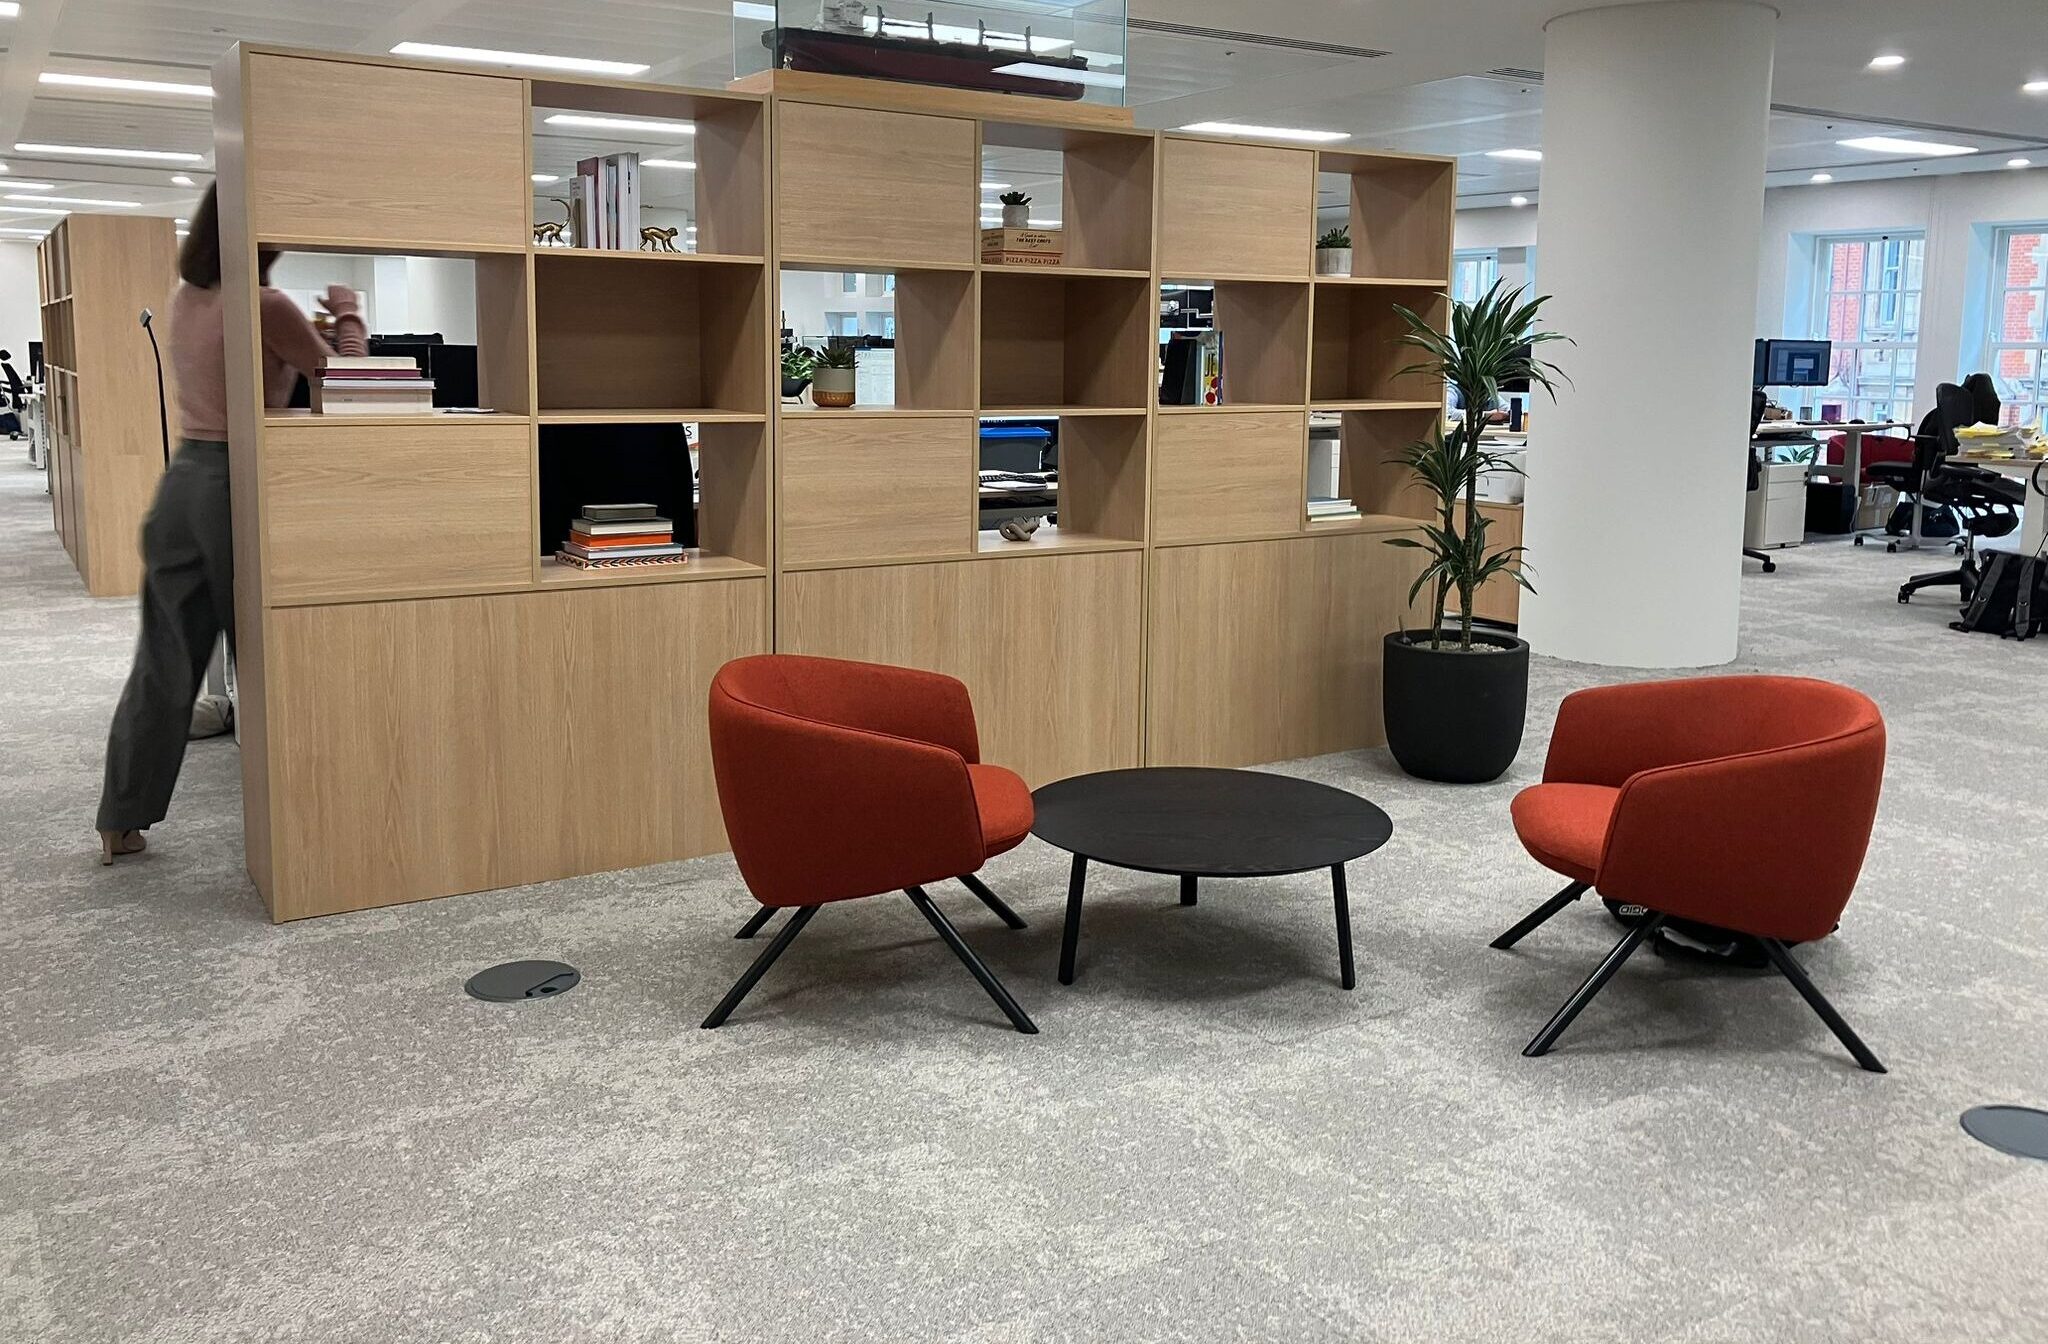 Carpet in Office Spaces - Loughton Contracts - London